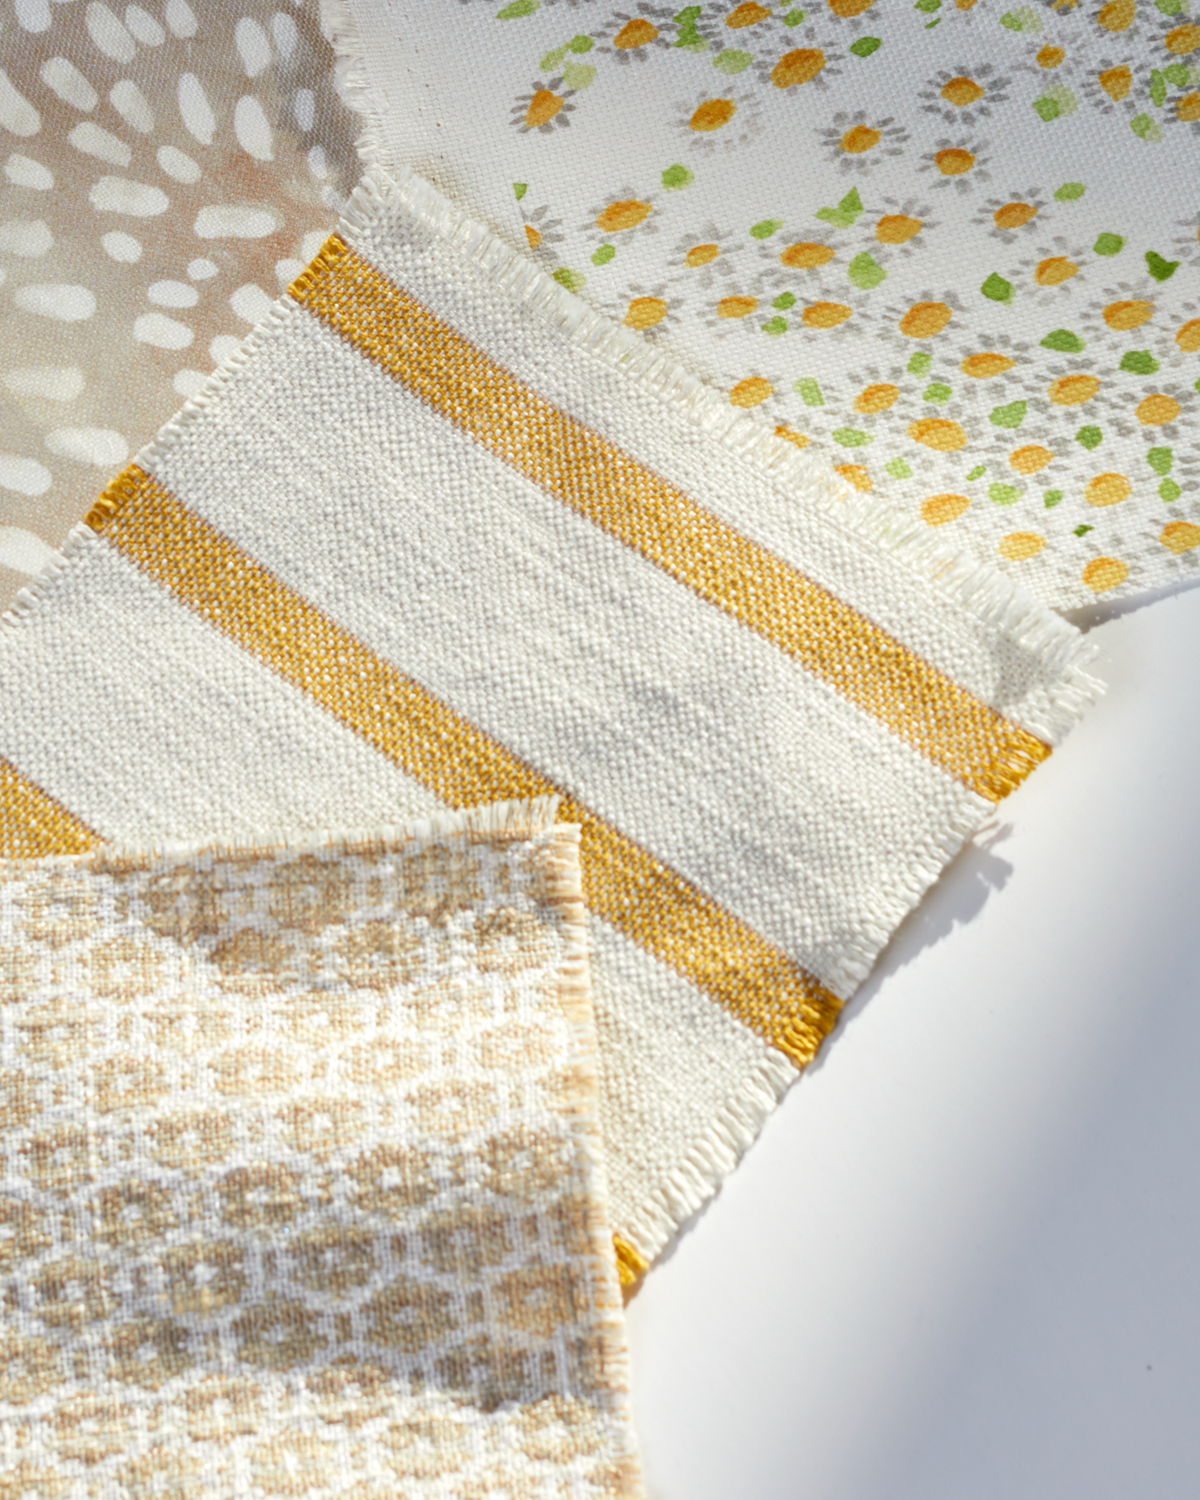 Floret Fabric in Wheat